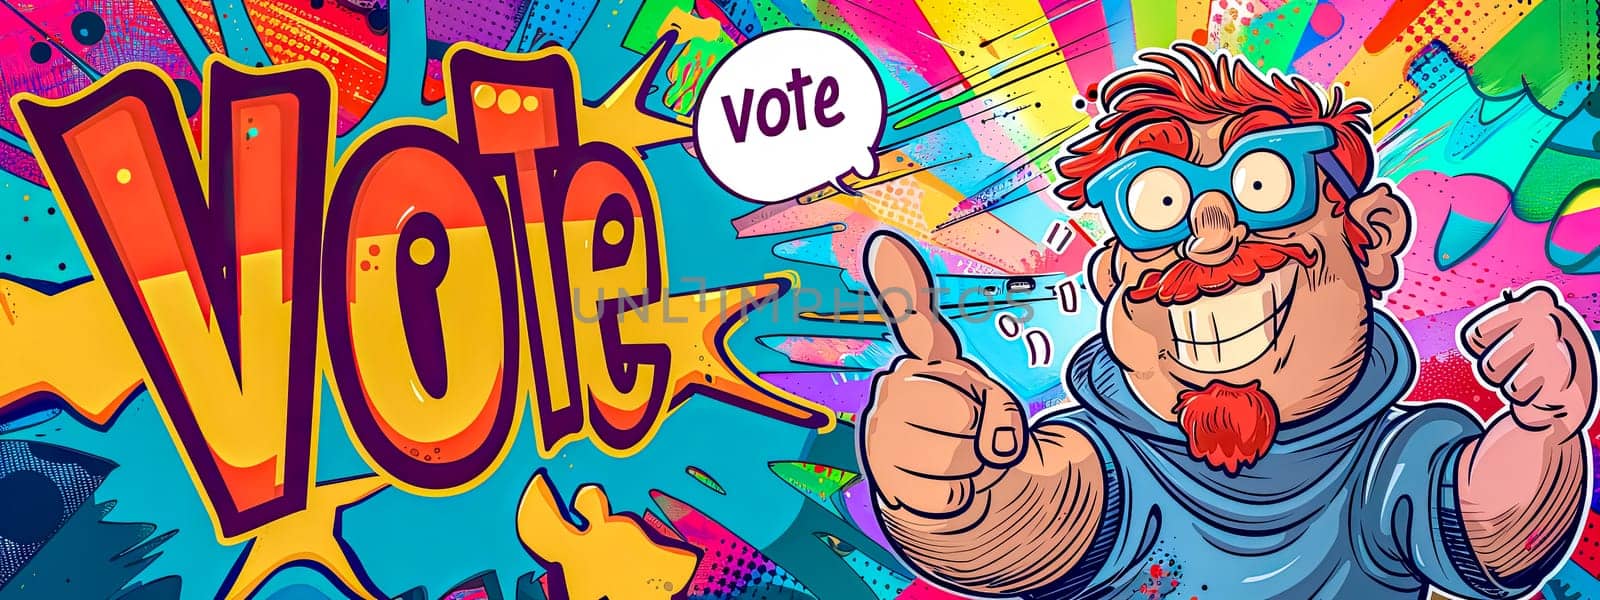 Vibrant cartoon illustration inspiring people to vote with a cheerful character